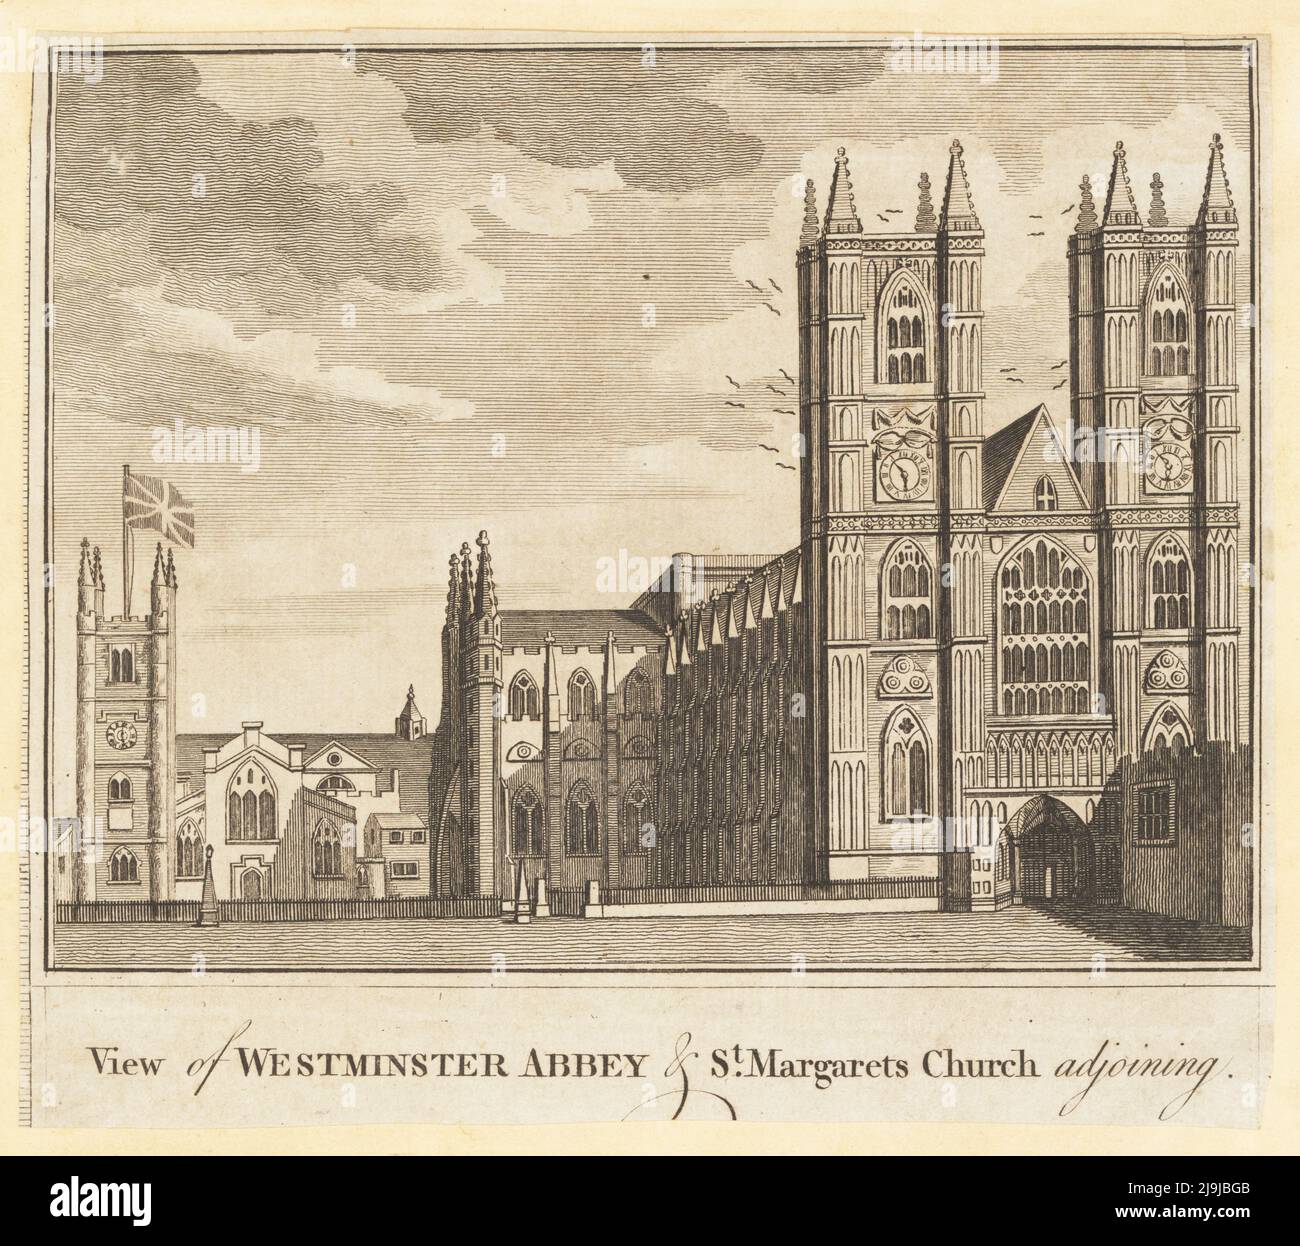 View of Westminster Abbey and St. Margarets Church adjoining. Copperplate engraving from William Thornton’s New, Complete and Universal History of the City of London, Alexander Hogg, King's Arms, No. 16 Paternoster Row, London, 1784. Stock Photo